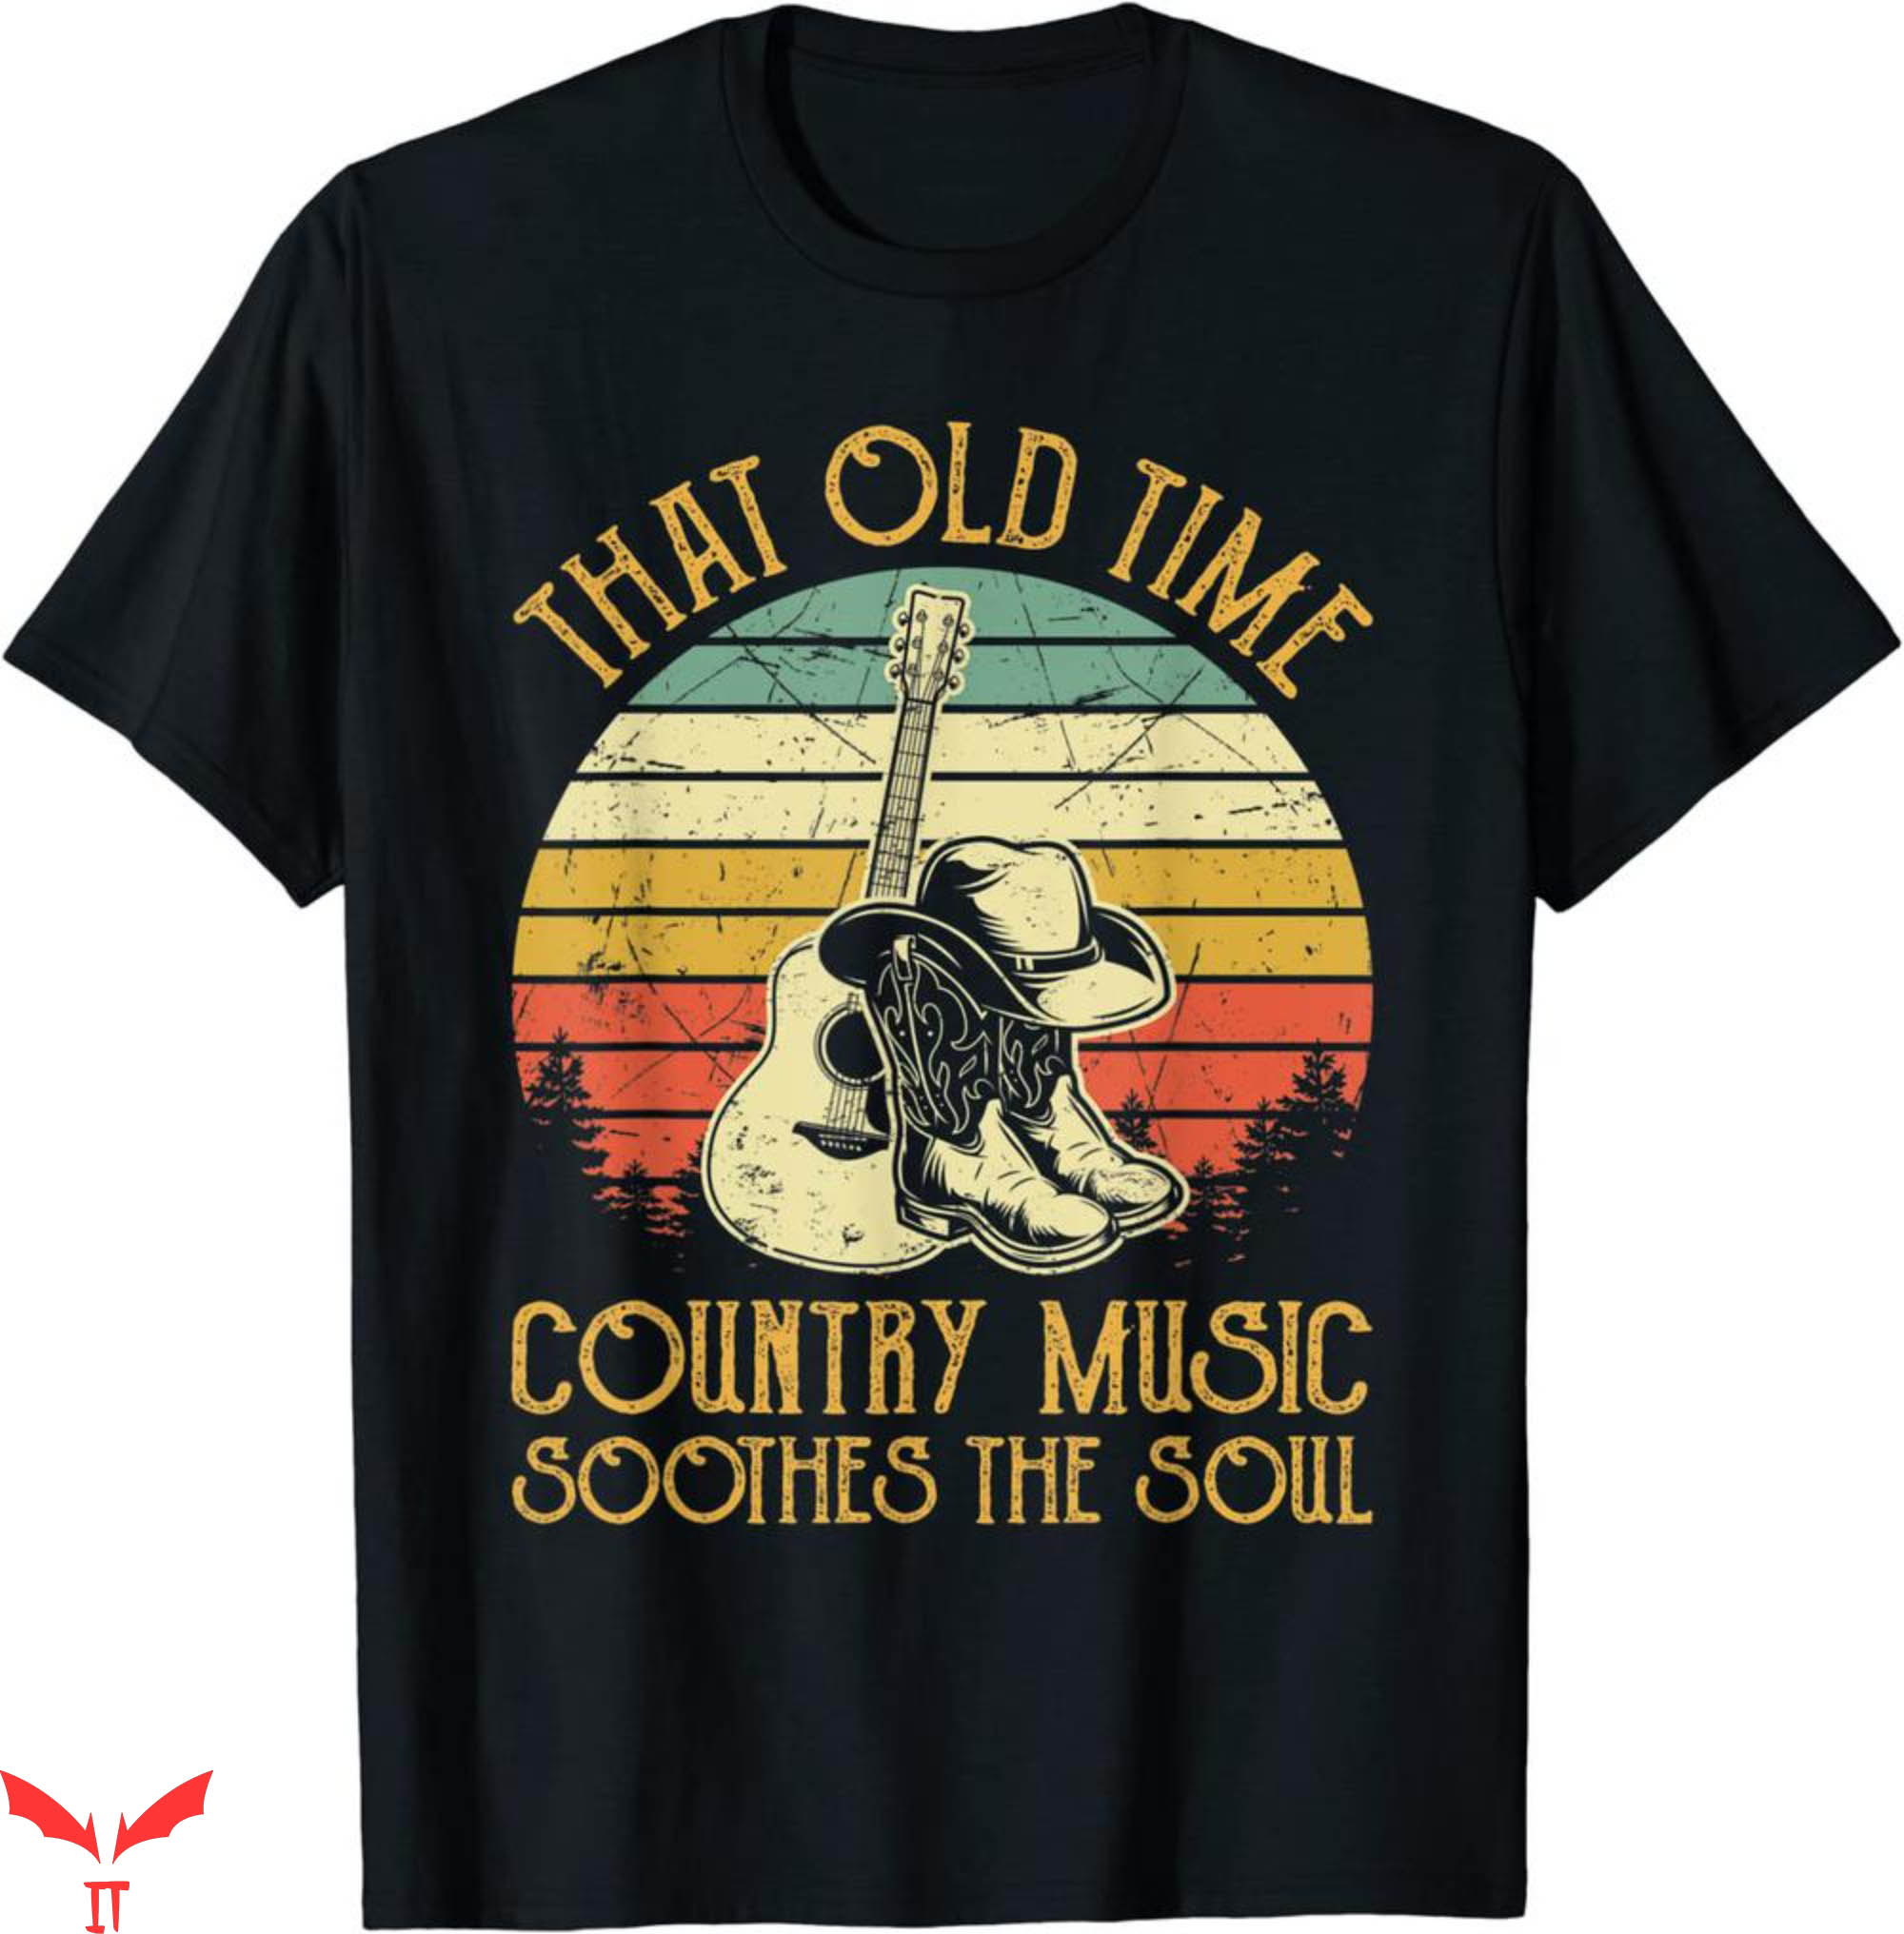 Country Music T-Shirt That Old Time Music Soothes The Soul